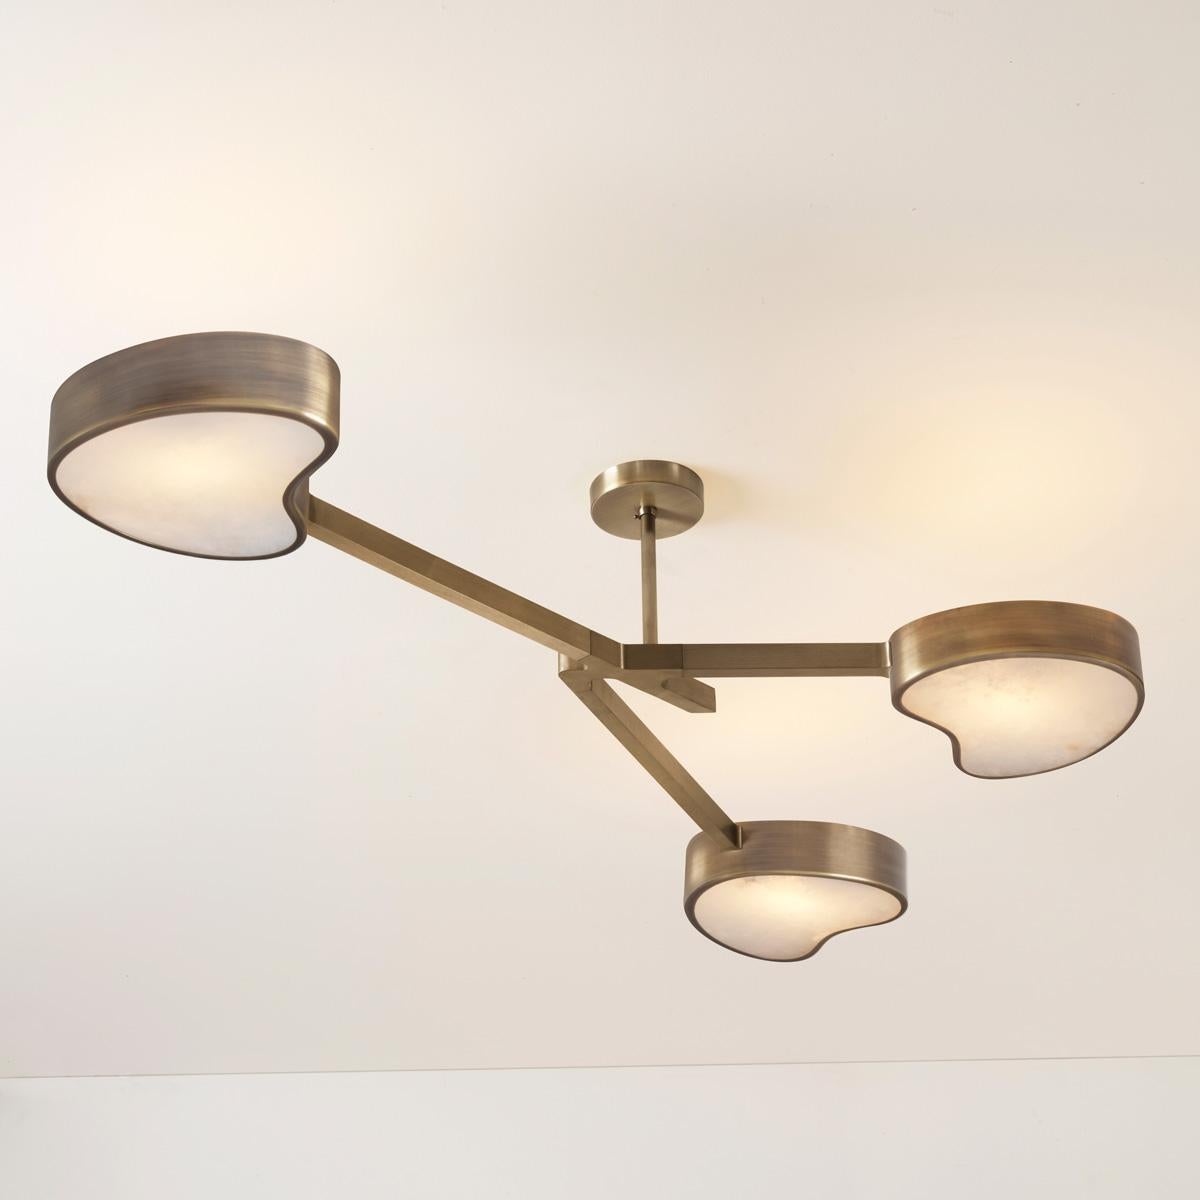 Cuore N.3 Ceiling Light by Gaspare Asaro. Polished Brass Finish For Sale 6